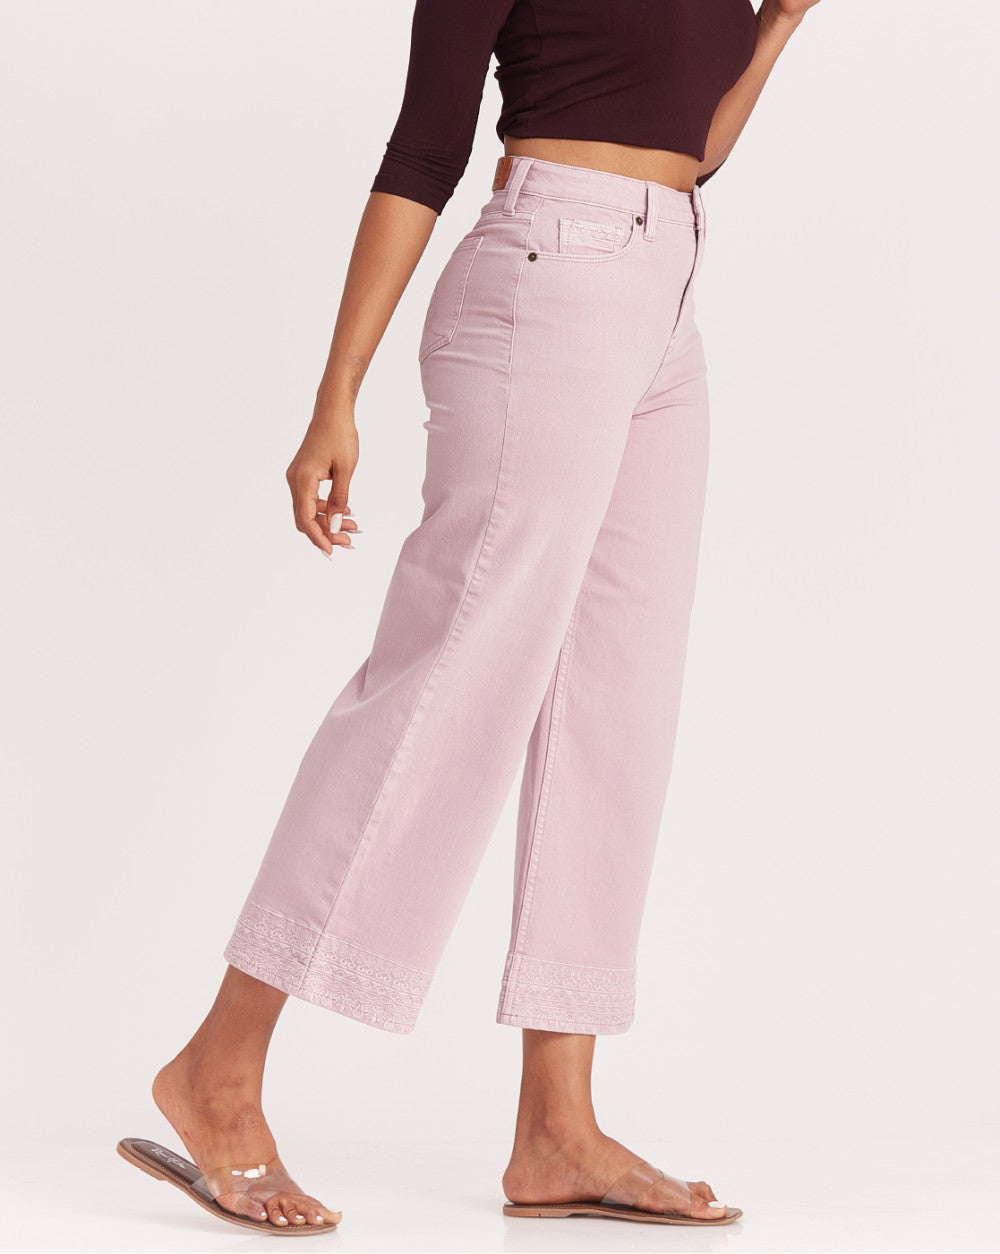 Wide Leg High Waist Boho Embroidered Colored Jeans - Lush Lilac